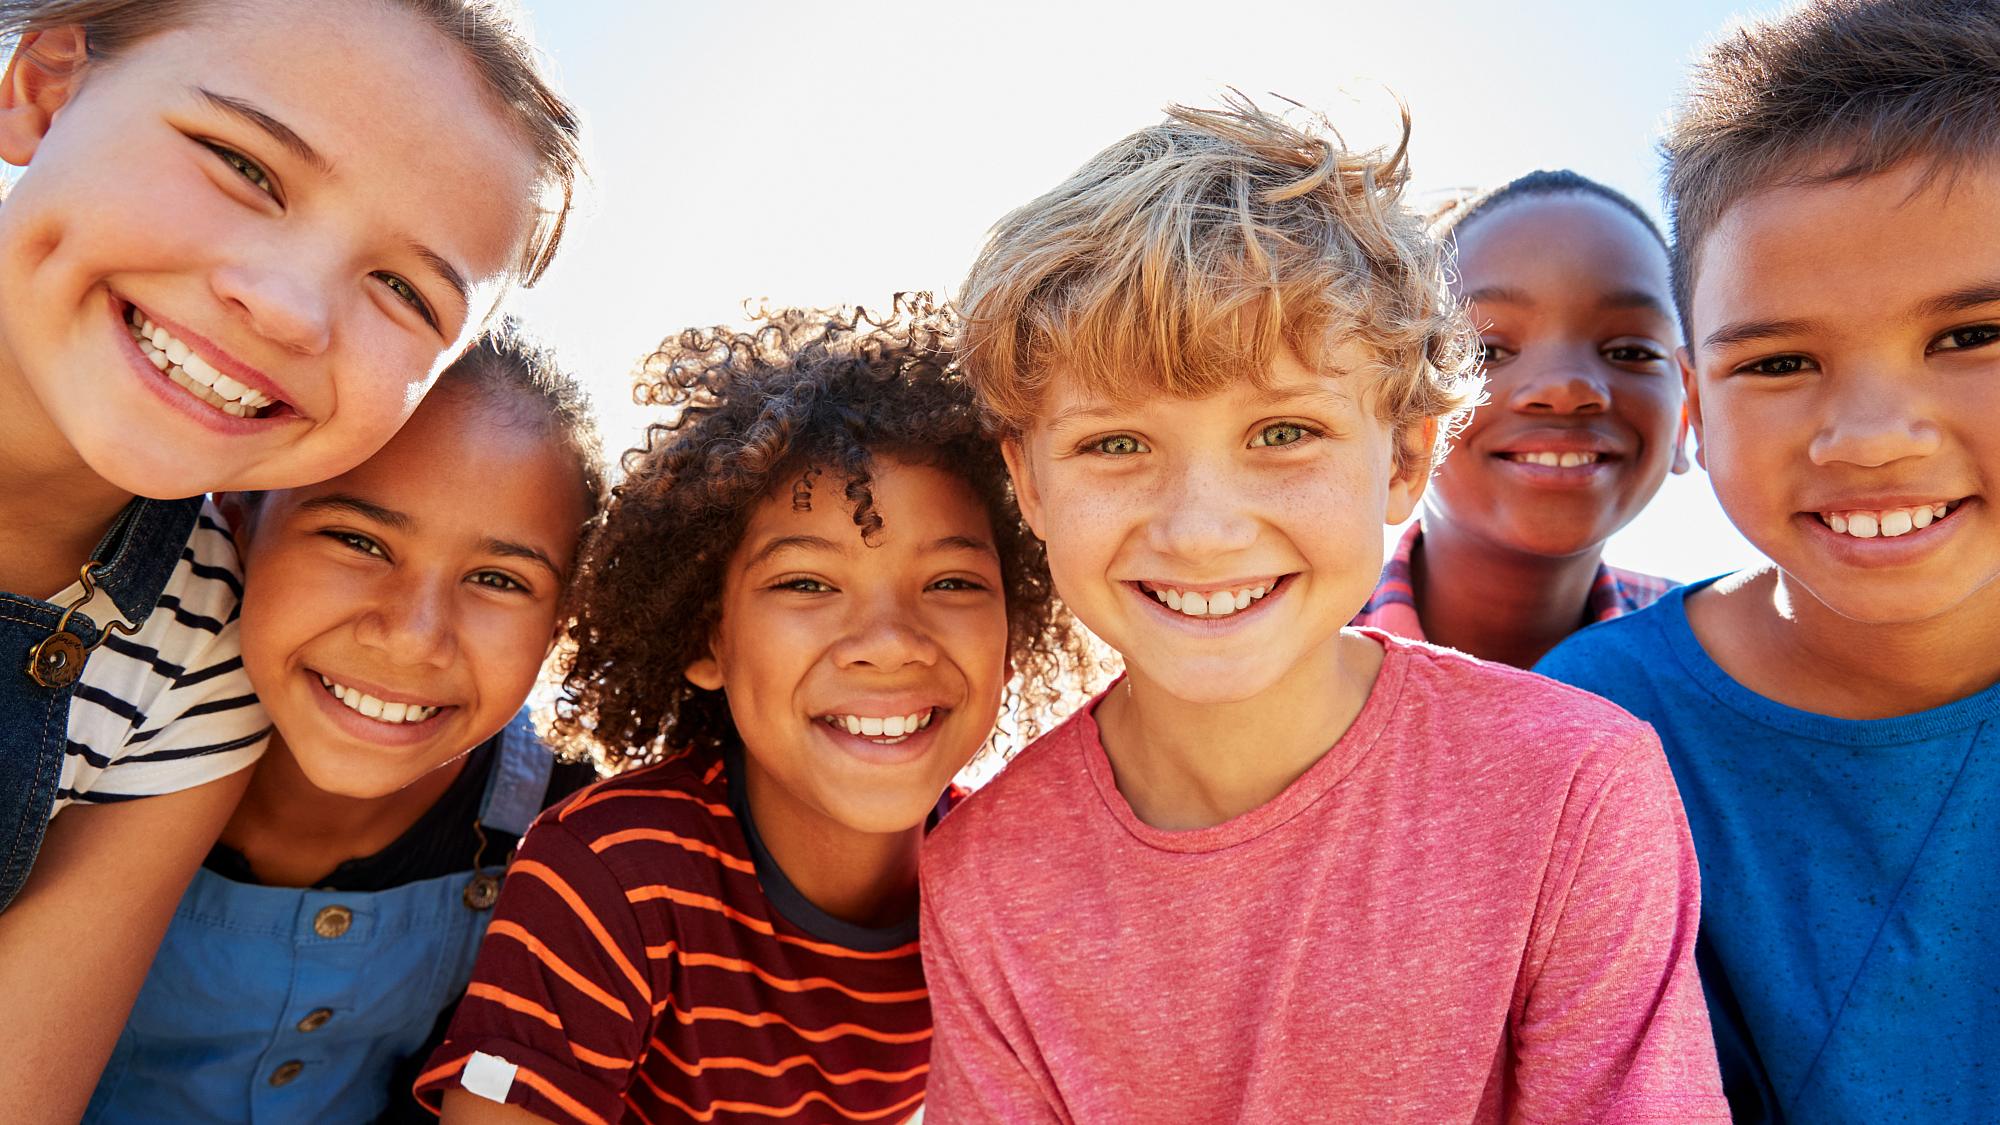 Diverse group of smiling young children